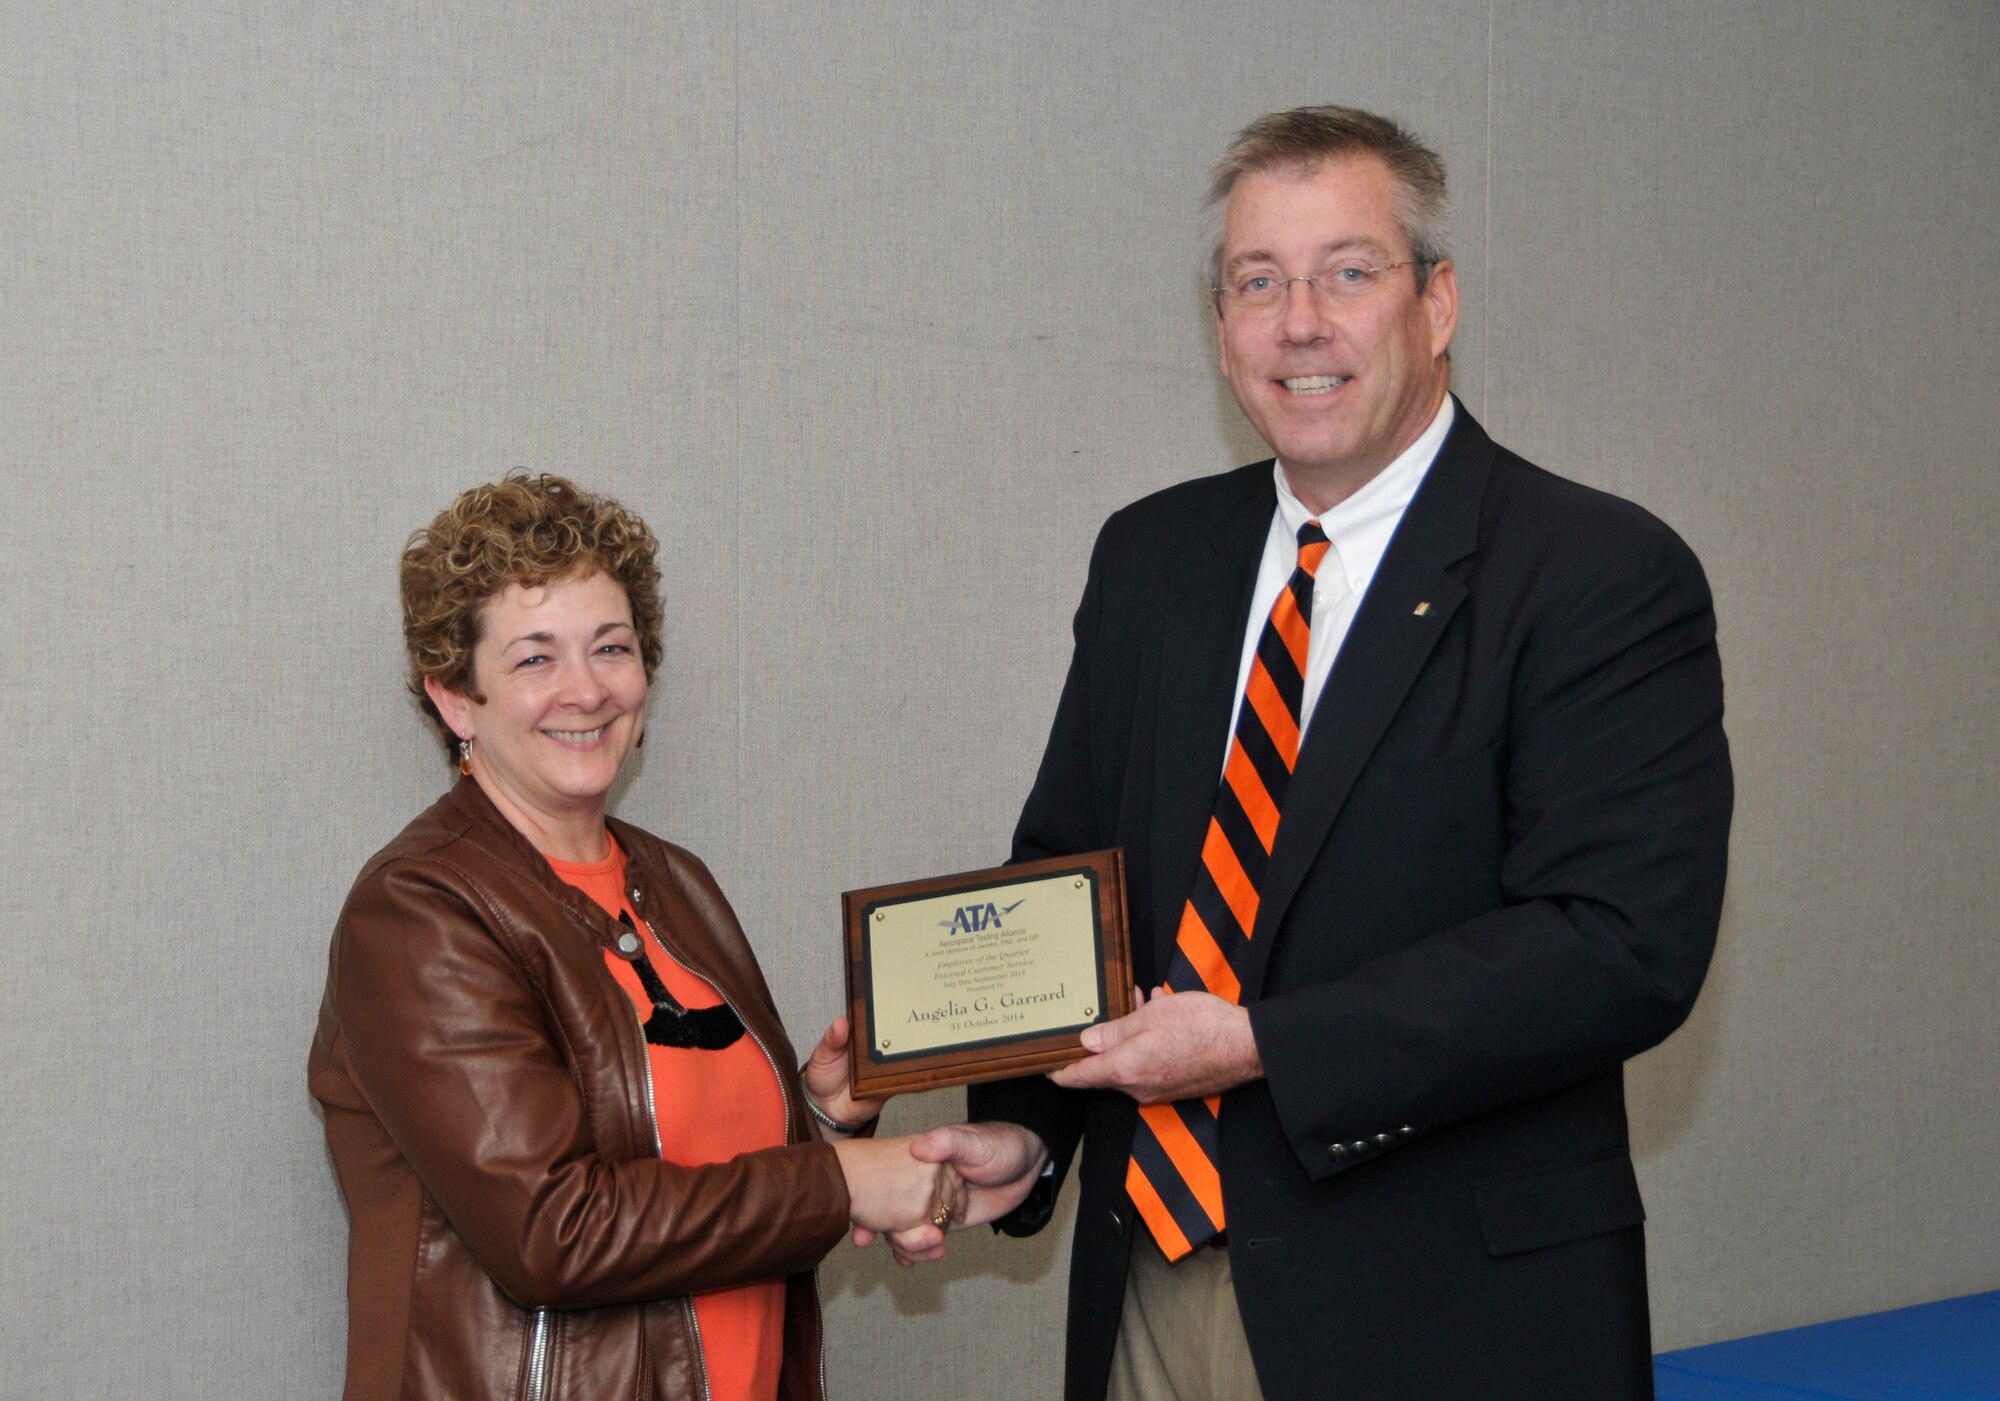 Angelia Garrard (left), with the ATA Mission Support Department, accepts the ATA External Customer Service Excellence of the Quarter Award from ATA Deputy General Manager Jeff Haars.